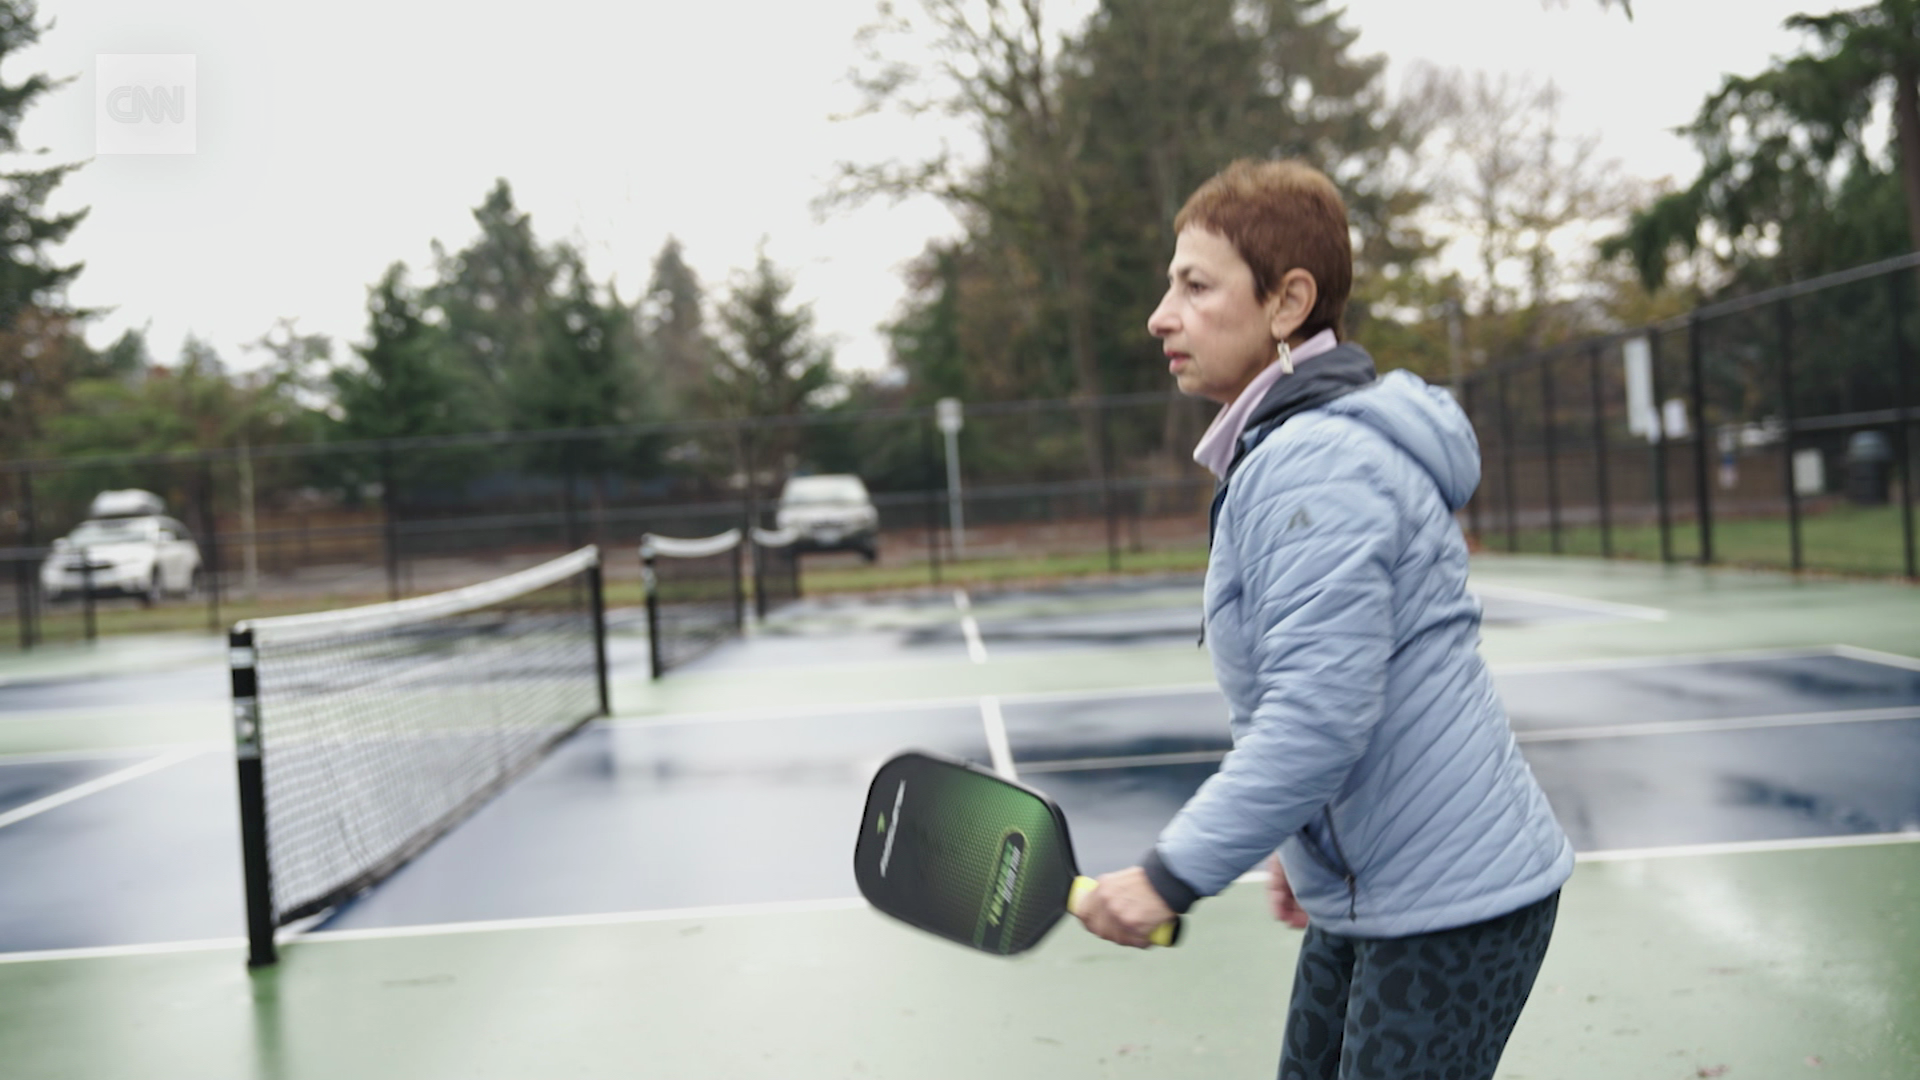 Can Pickleball Mania Revitalize Dying Shopping Malls?